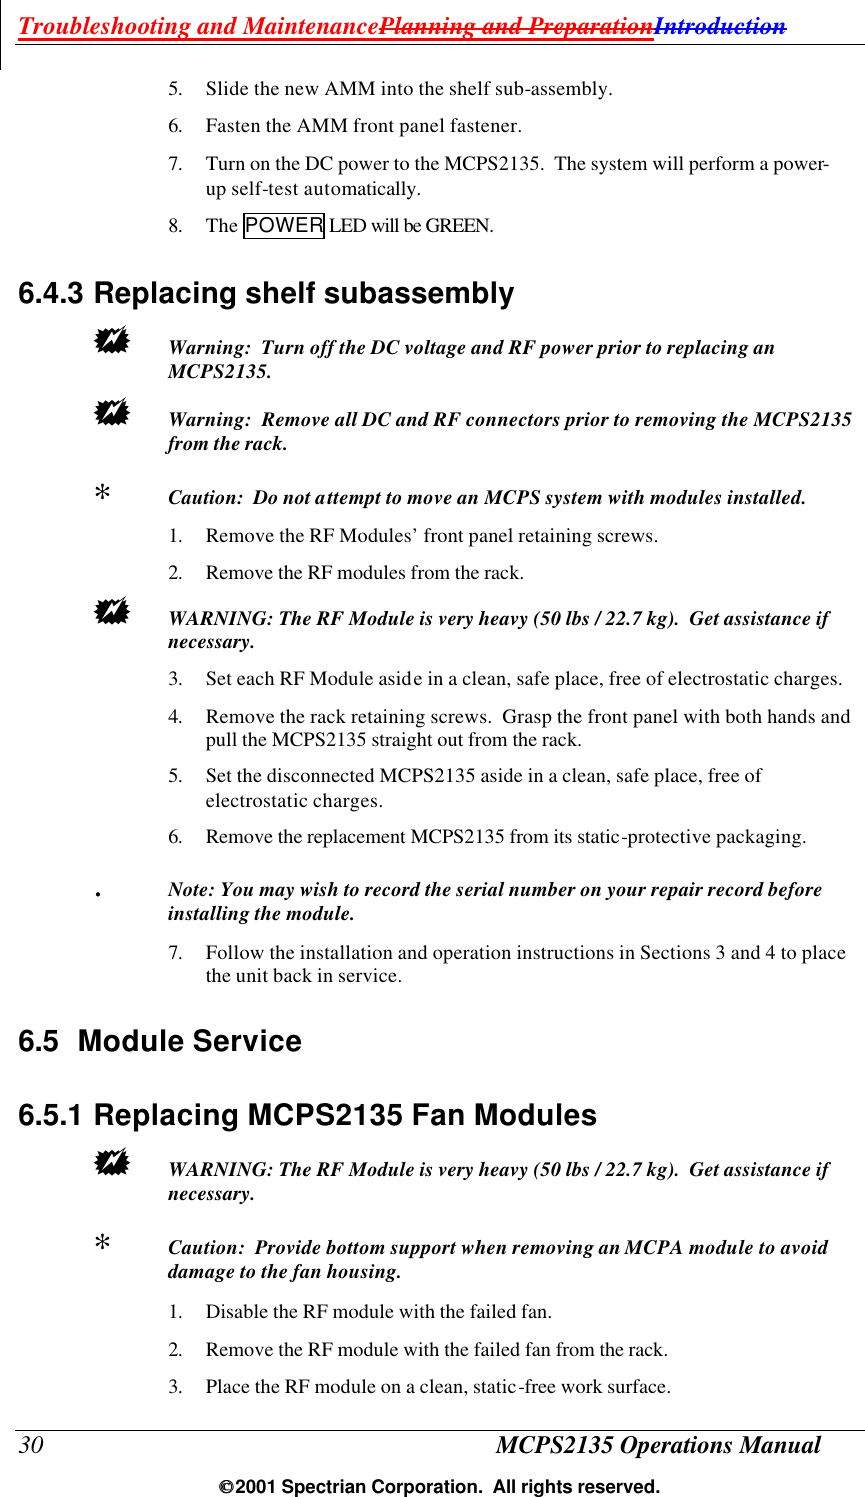 Troubleshooting and MaintenancePlanning and PreparationIntroduction 30 MCPS2135 Operations Manual  2001 Spectrian Corporation.  All rights reserved. 5. Slide the new AMM into the shelf sub-assembly.  6. Fasten the AMM front panel fastener. 7. Turn on the DC power to the MCPS2135.  The system will perform a power-up self-test automatically. 8. The POWER LED will be GREEN. 6.4.3 Replacing shelf subassembly +  Warning:  Turn off the DC voltage and RF power prior to replacing an MCPS2135.   +  Warning:  Remove all DC and RF connectors prior to removing the MCPS2135 from the rack.  ∗  Caution:  Do not attempt to move an MCPS system with modules installed. 1. Remove the RF Modules’ front panel retaining screws.   2. Remove the RF modules from the rack. +  WARNING: The RF Module is very heavy (50 lbs / 22.7 kg).  Get assistance if necessary. 3. Set each RF Module aside in a clean, safe place, free of electrostatic charges. 4. Remove the rack retaining screws.  Grasp the front panel with both hands and pull the MCPS2135 straight out from the rack. 5. Set the disconnected MCPS2135 aside in a clean, safe place, free of electrostatic charges. 6. Remove the replacement MCPS2135 from its static-protective packaging.  .  Note: You may wish to record the serial number on your repair record before installing the module. 7. Follow the installation and operation instructions in Sections 3 and 4 to place the unit back in service. 6.5 Module Service 6.5.1 Replacing MCPS2135 Fan Modules +  WARNING: The RF Module is very heavy (50 lbs / 22.7 kg).  Get assistance if necessary. ∗  Caution:  Provide bottom support when removing an MCPA module to avoid damage to the fan housing. 1. Disable the RF module with the failed fan. 2. Remove the RF module with the failed fan from the rack. 3. Place the RF module on a clean, static-free work surface. 